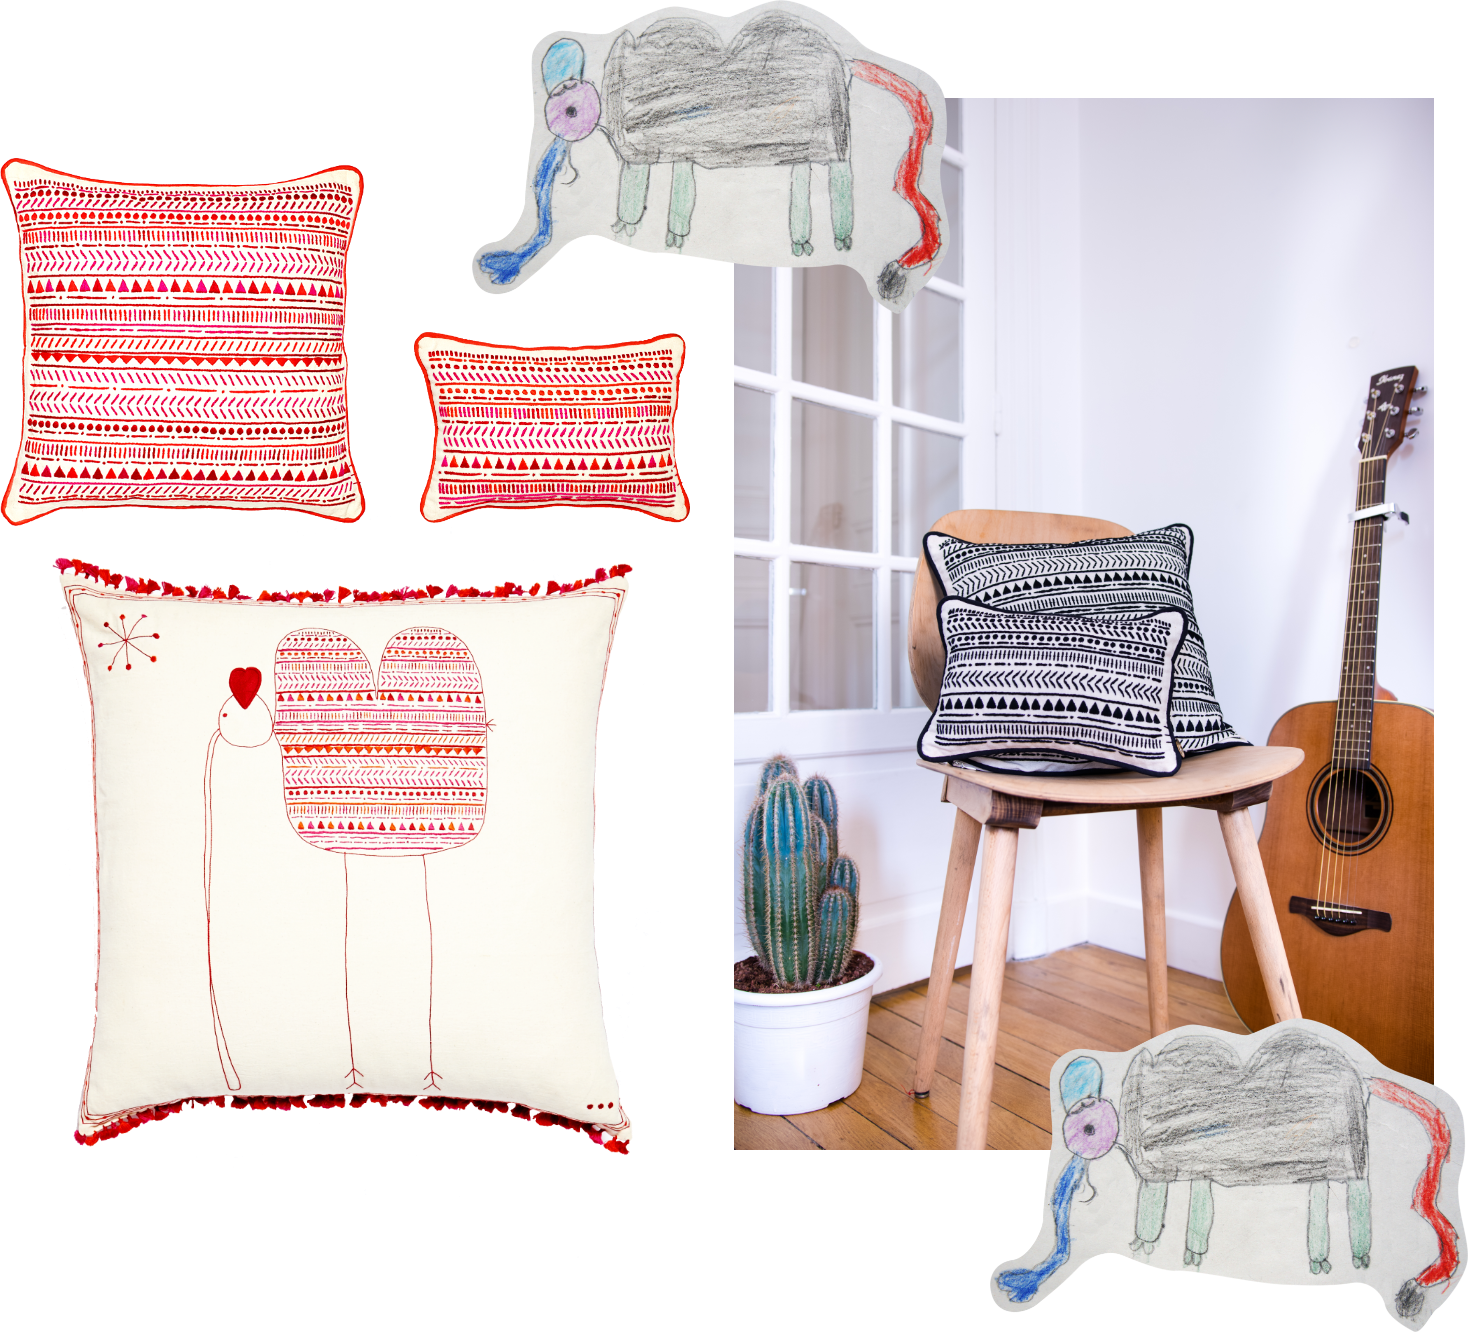 Tomorrows with Heart, a sustainable homeware brand by Talia Souki.